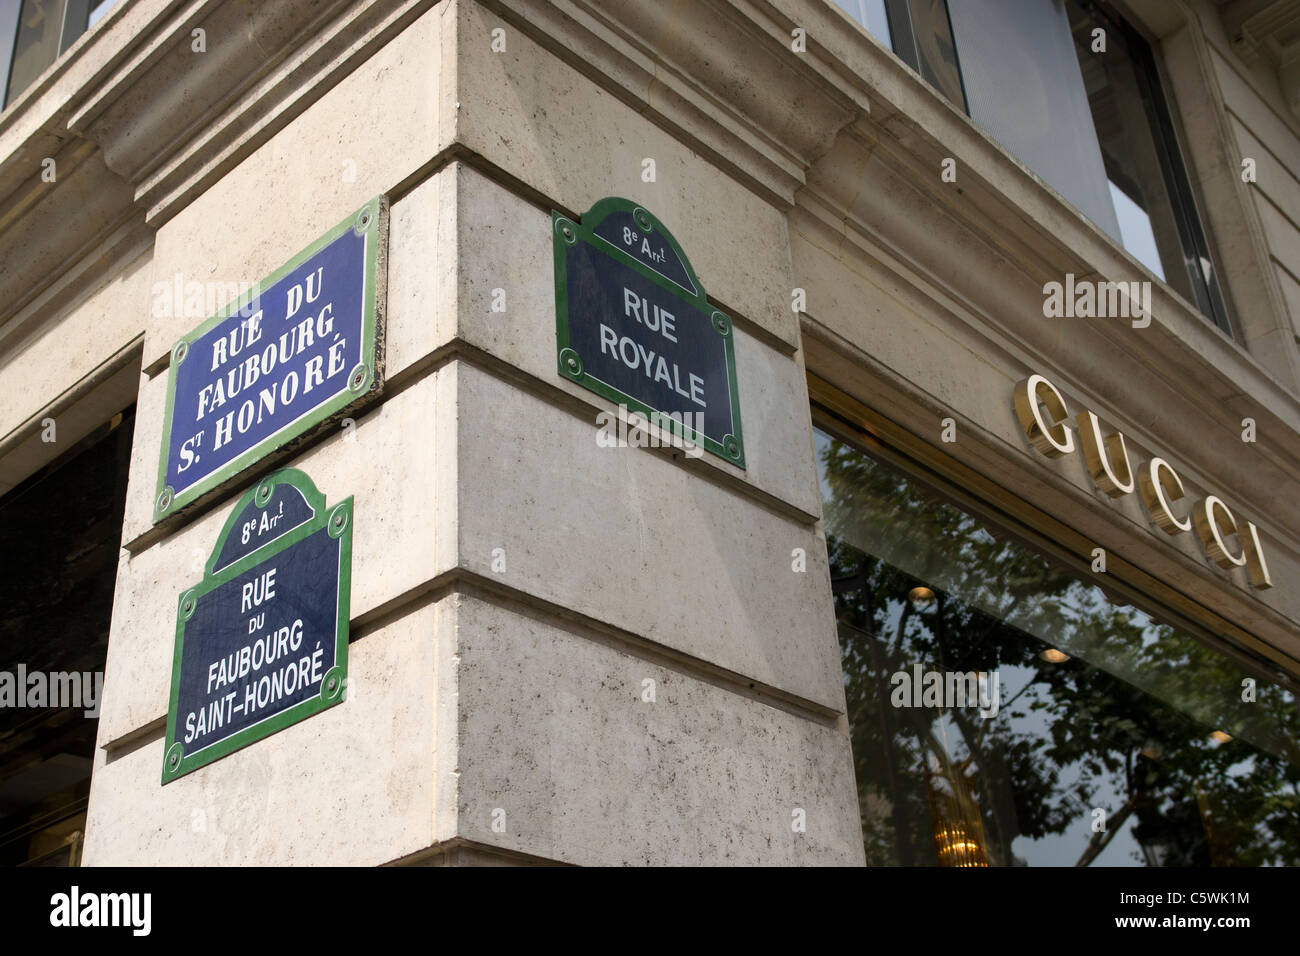 Gucci Fashion Luxury Store In Avenue Montaigne With People In Queue In Paris  France Stock Photo - Download Image Now - iStock